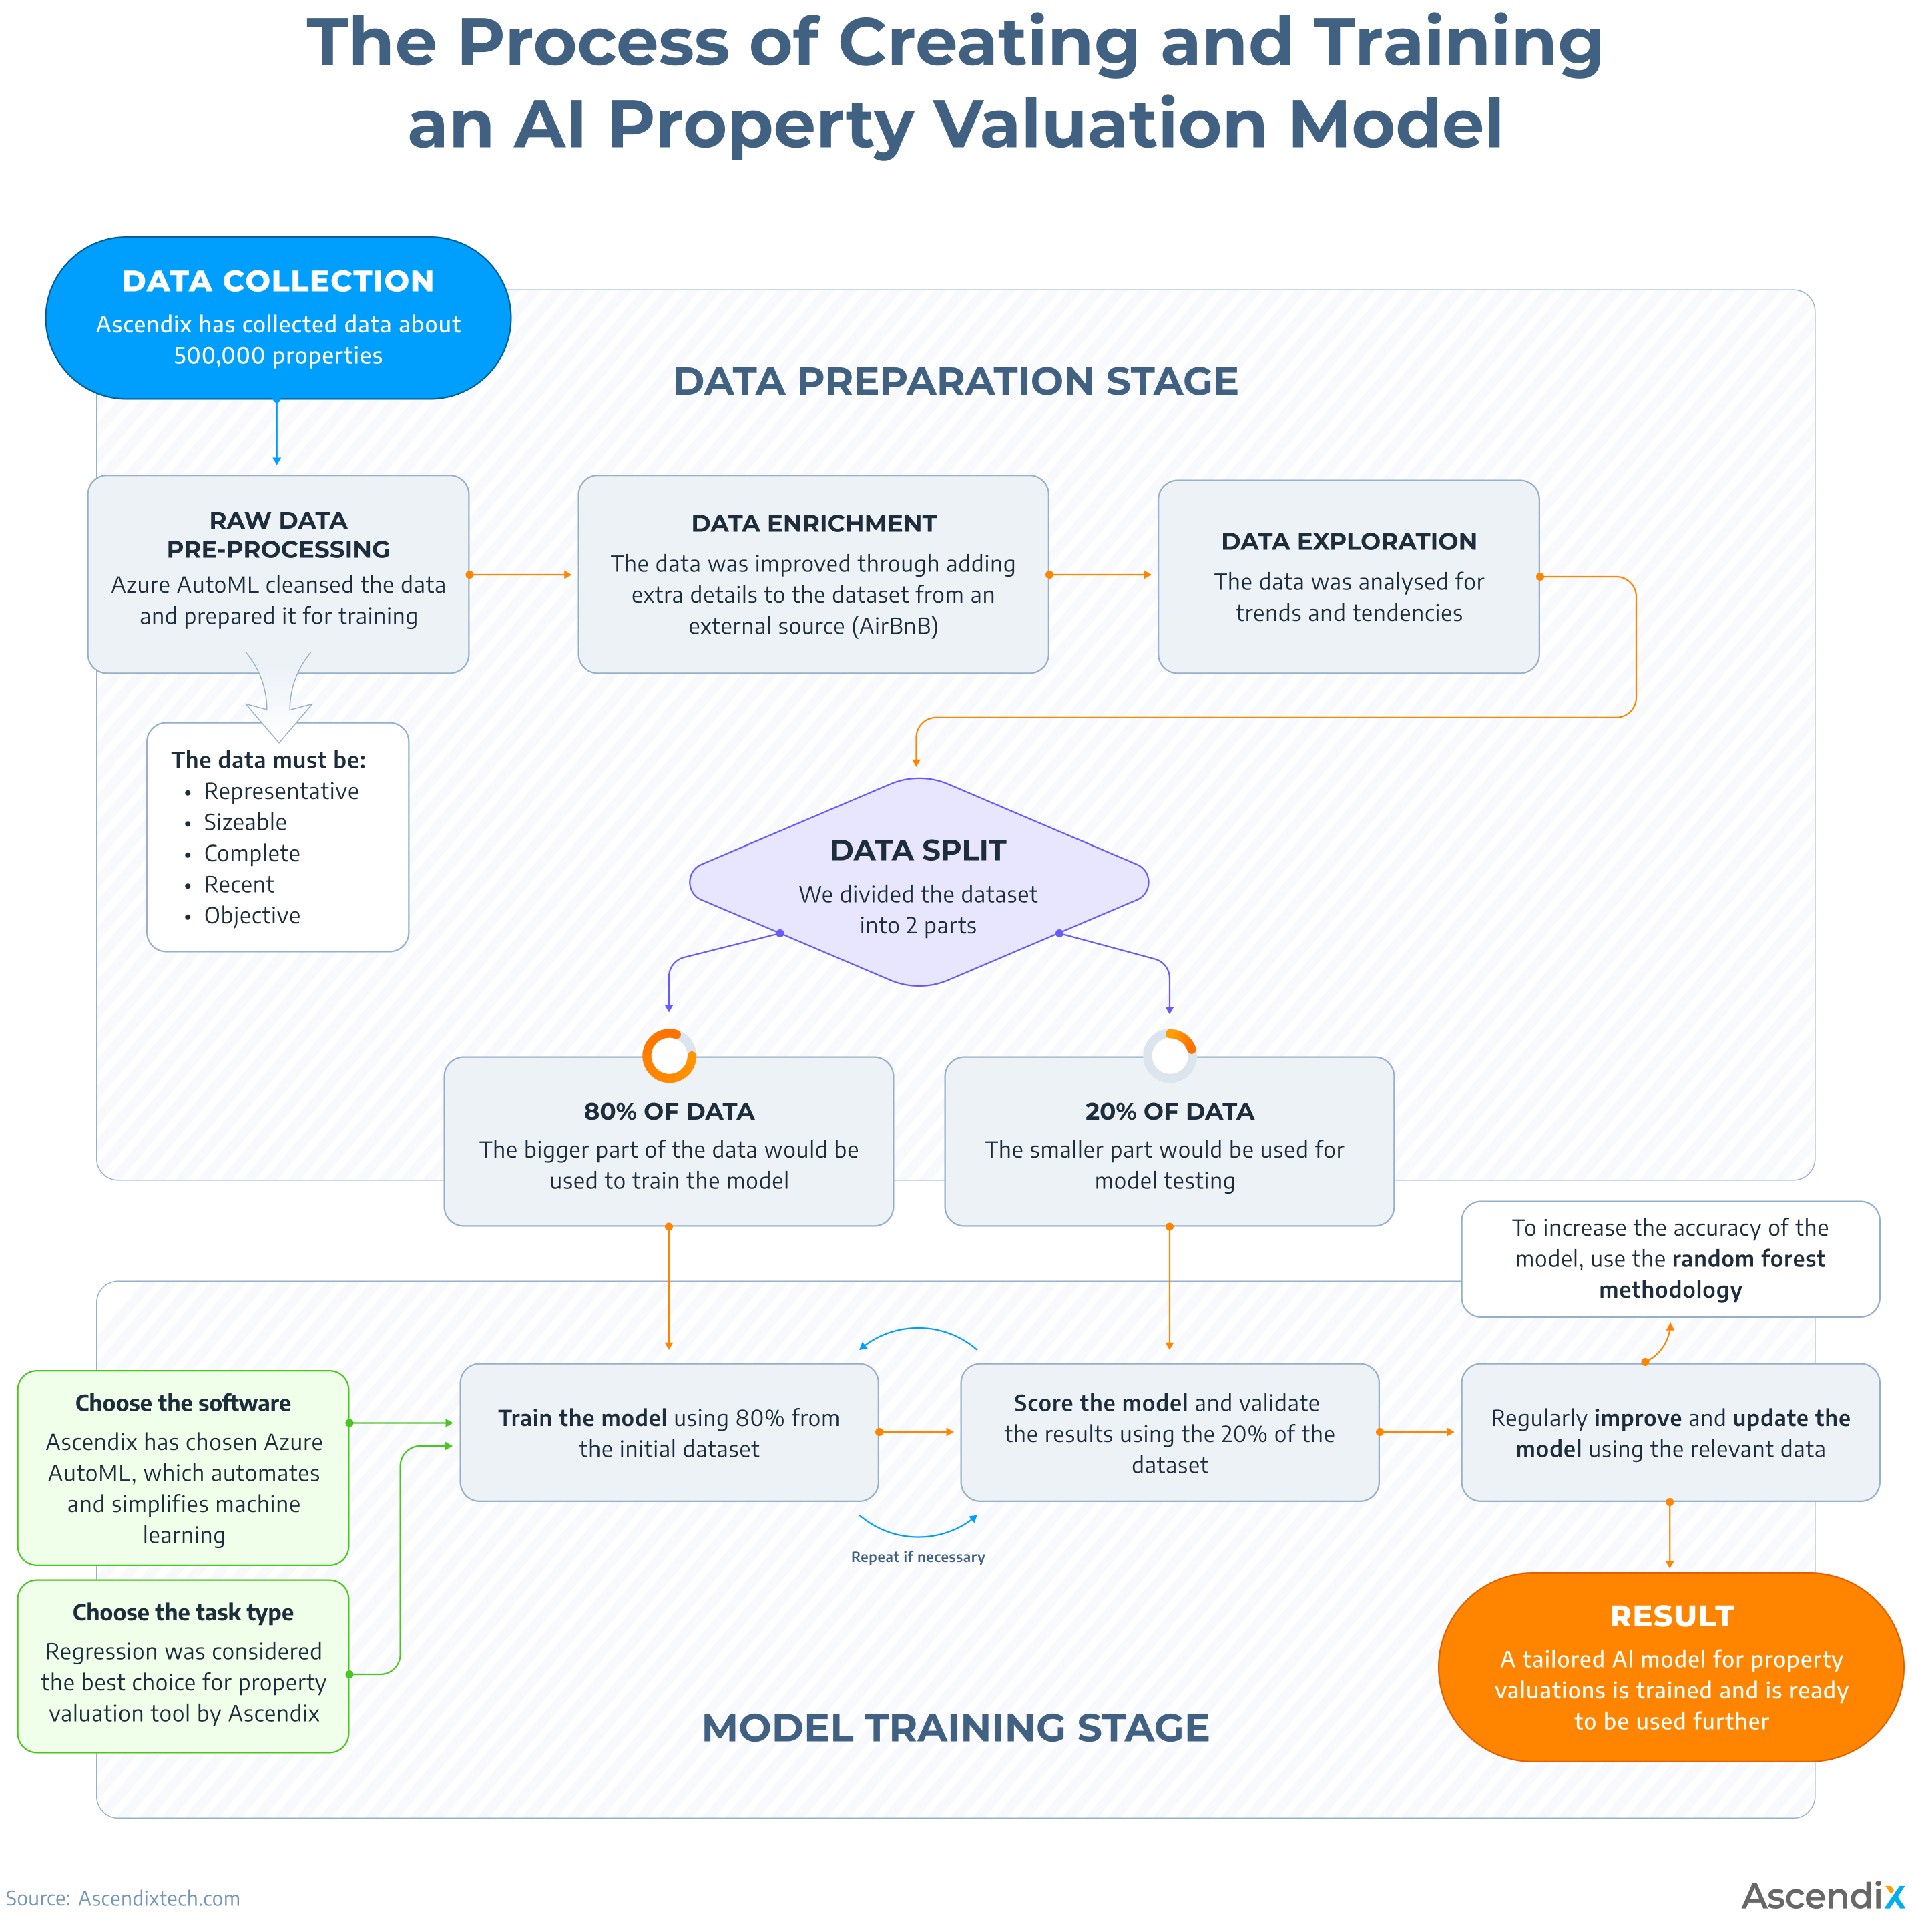 02_The Process of Creating and Training an AI Property Valuation Model